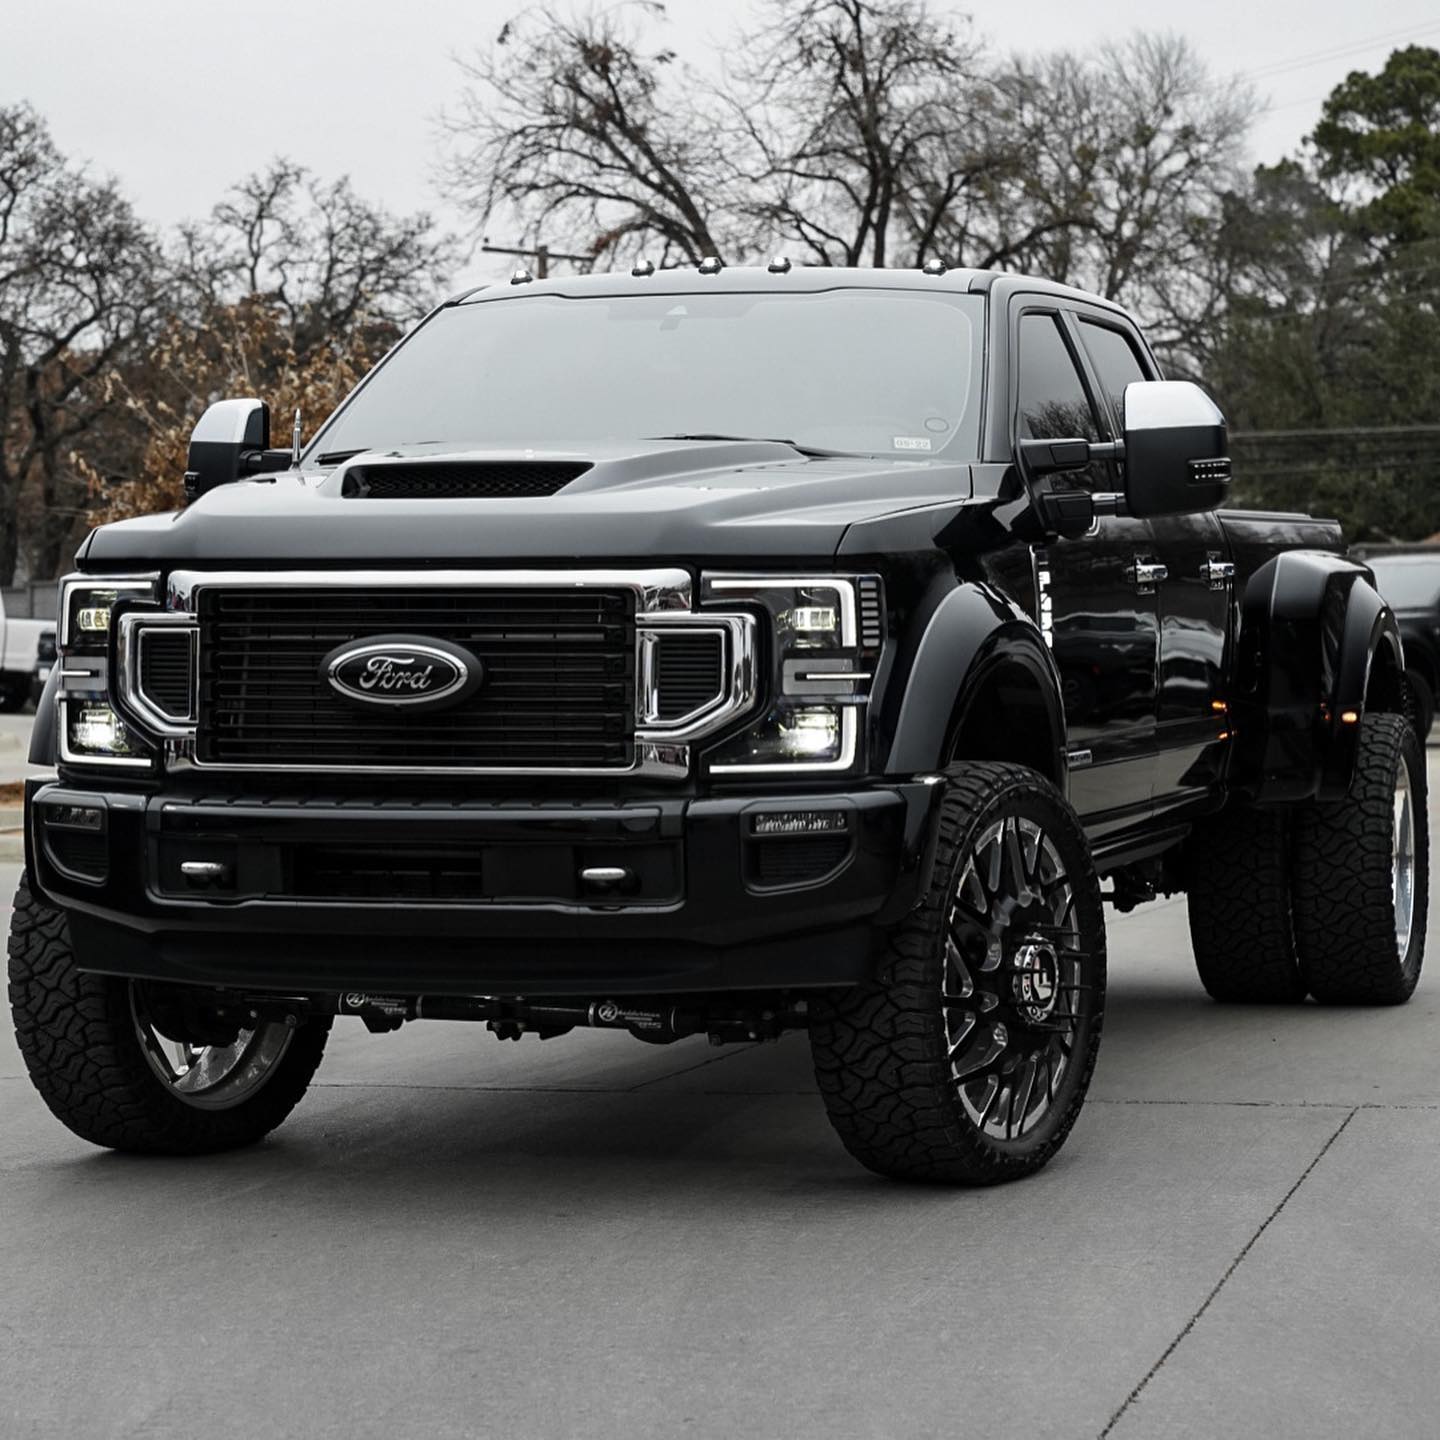 Pitch Black, Lifted Ford F-450 Dually on Spiked 26s Is Not Your Average  “Hi-Riser” - autoevolution